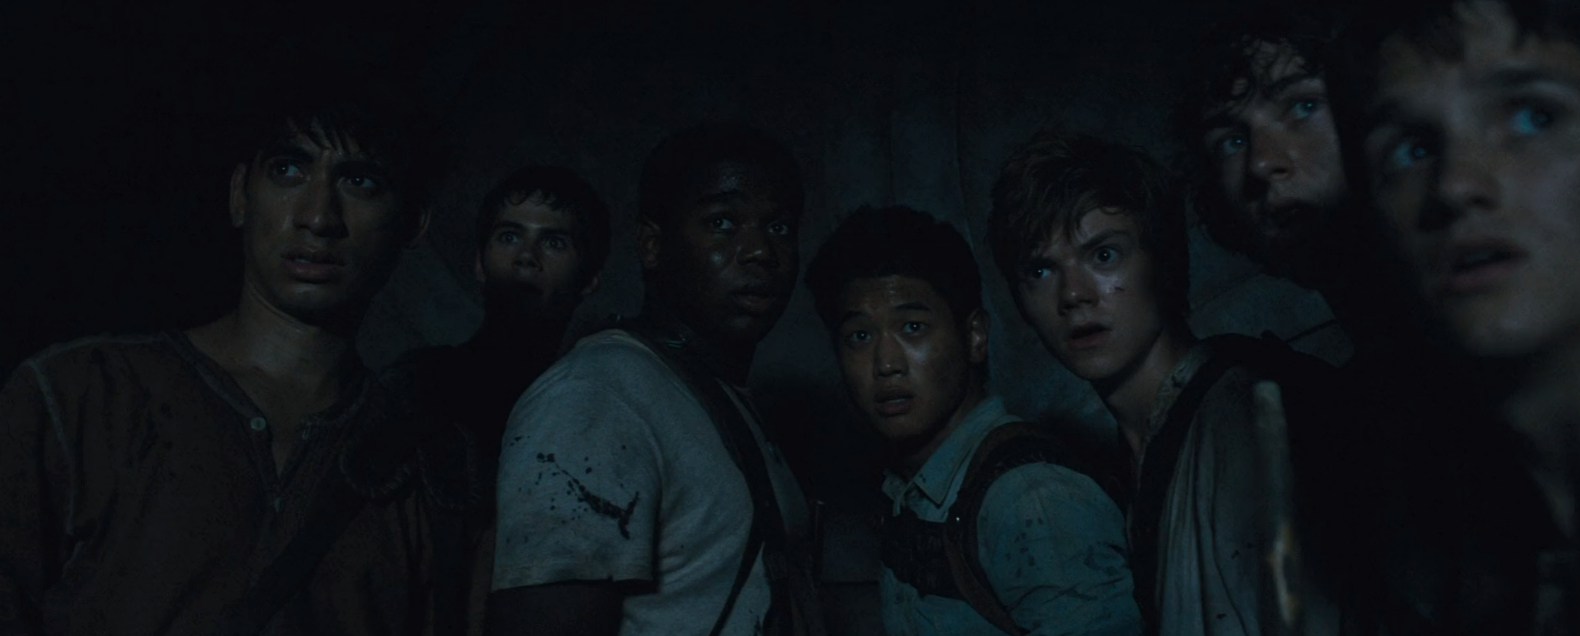 The Maze Runner Movie Review